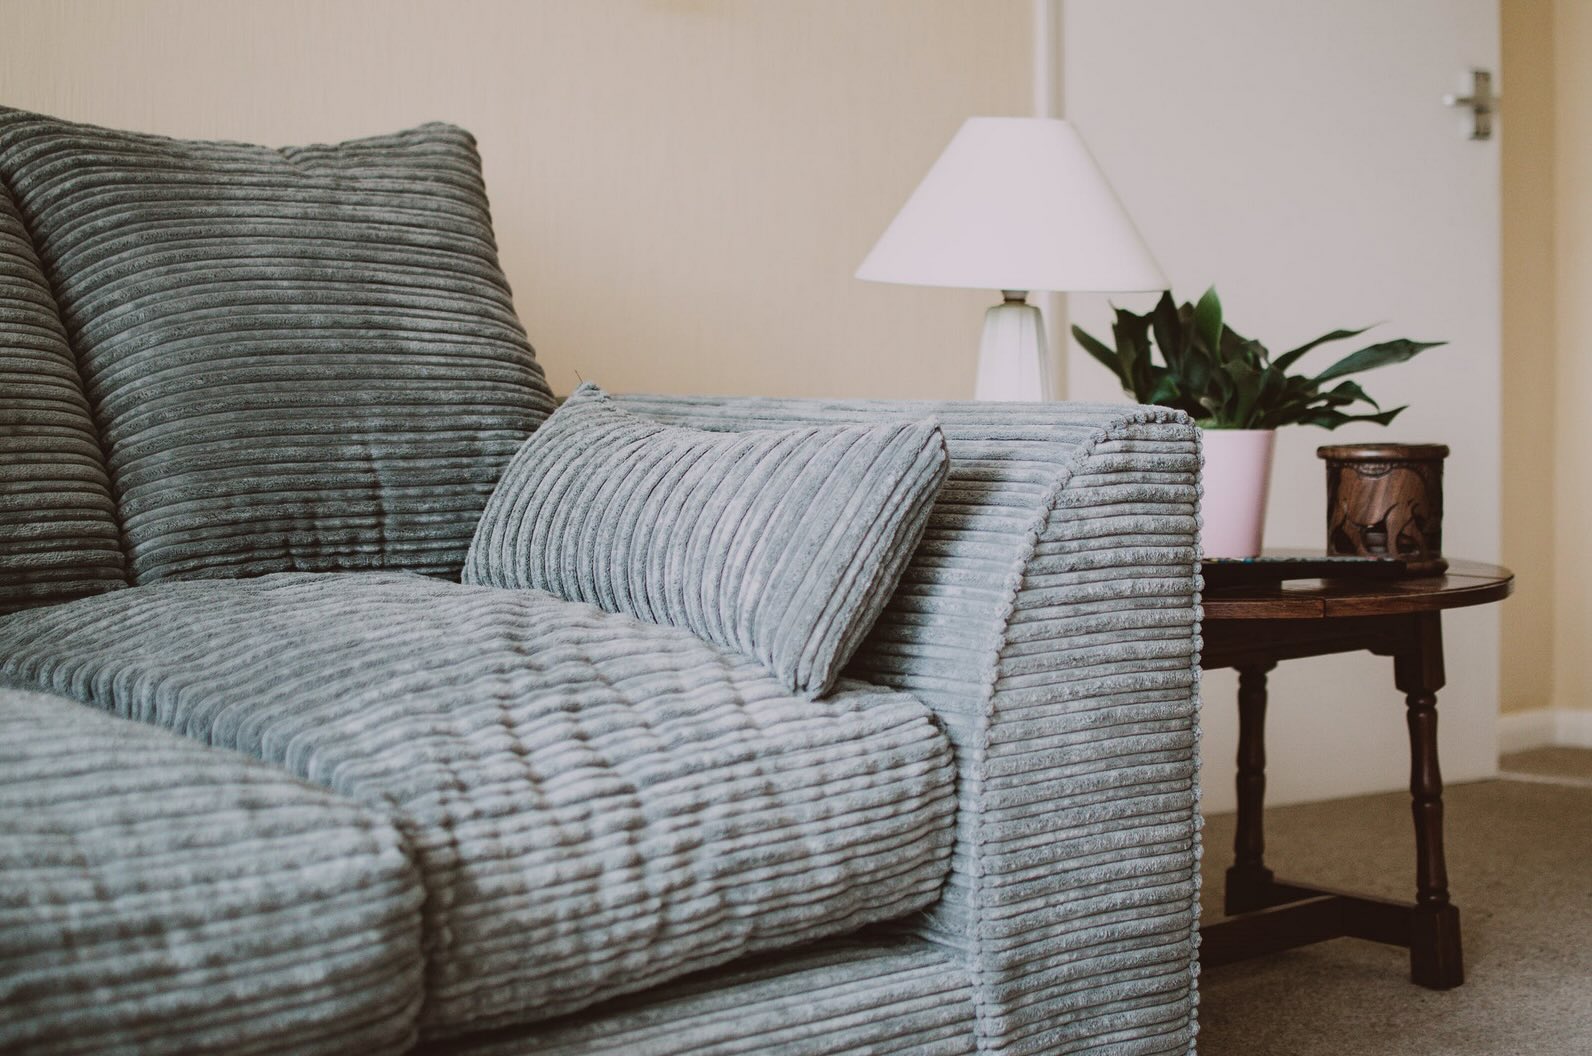 How To Remove Stains From Couch Cushions